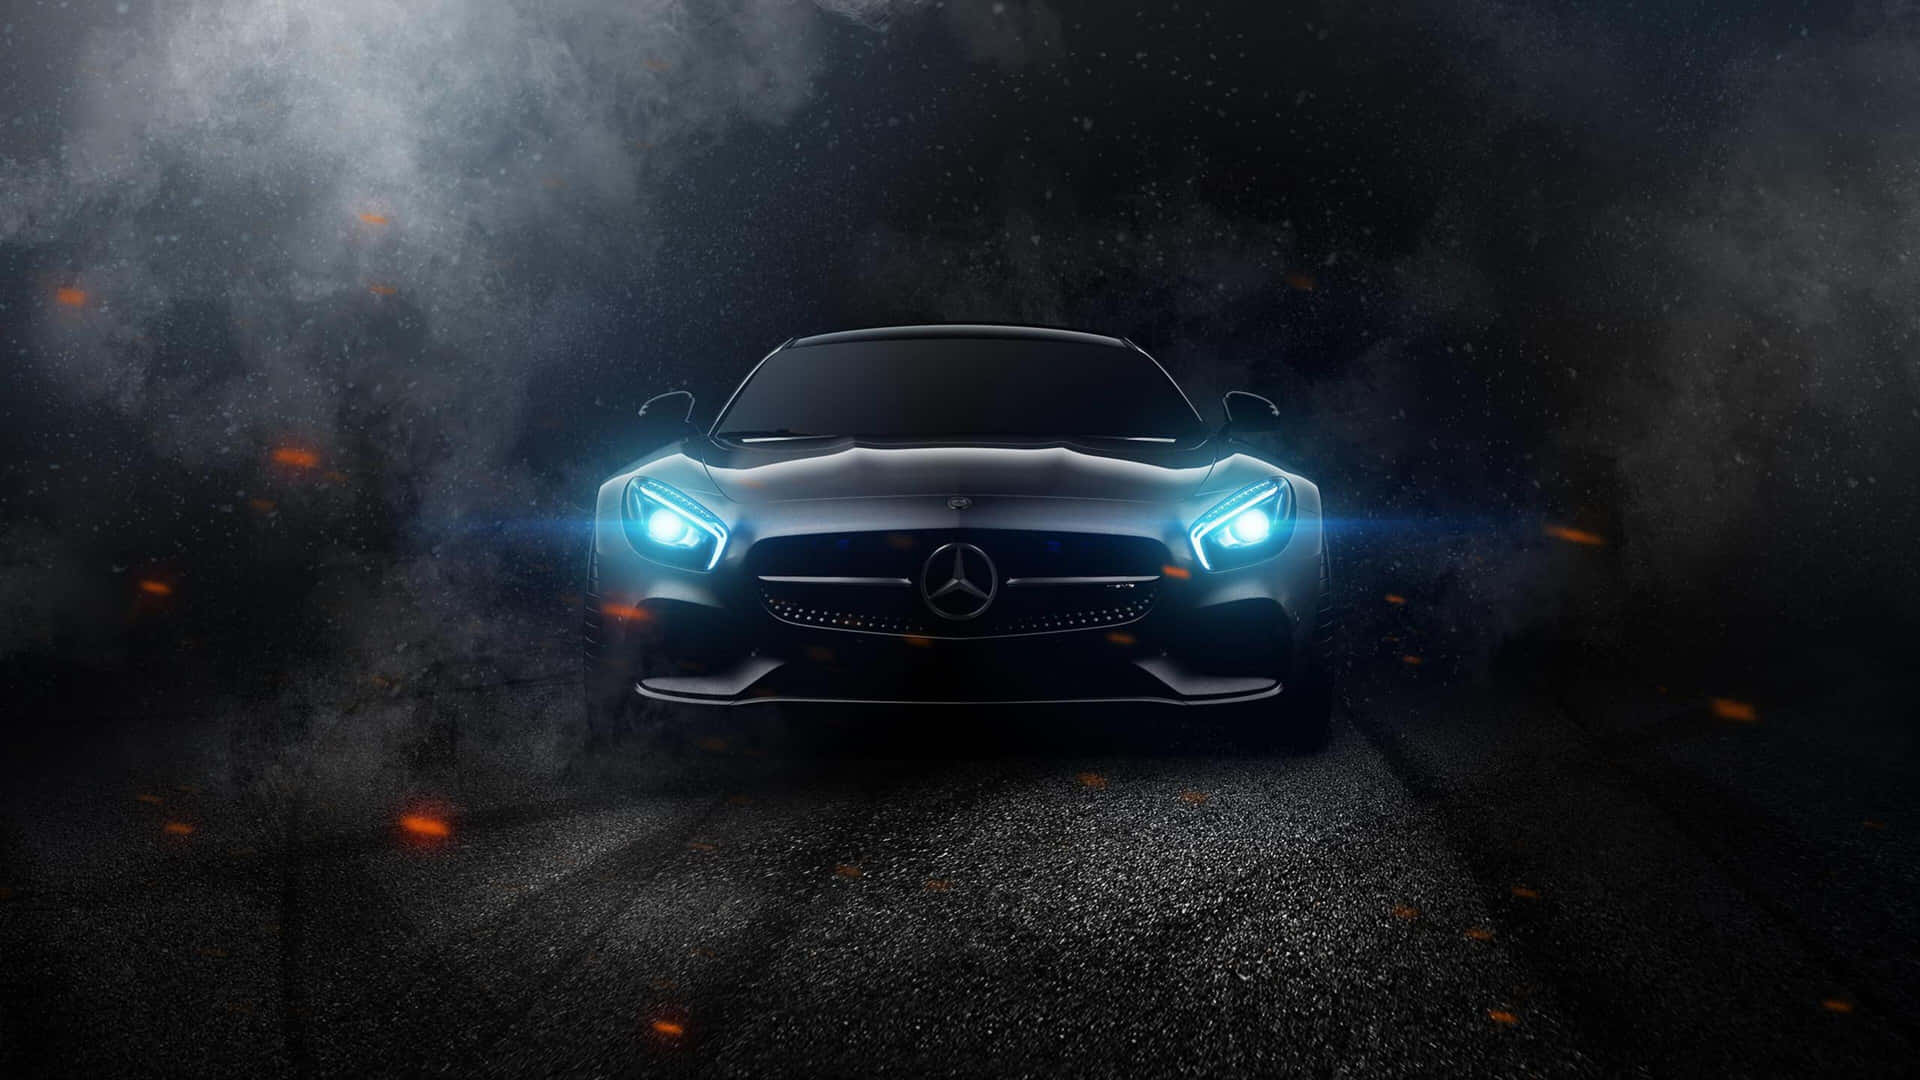 The Epitome of Luxury – Mercedes Benz in 4K Quality Wallpaper